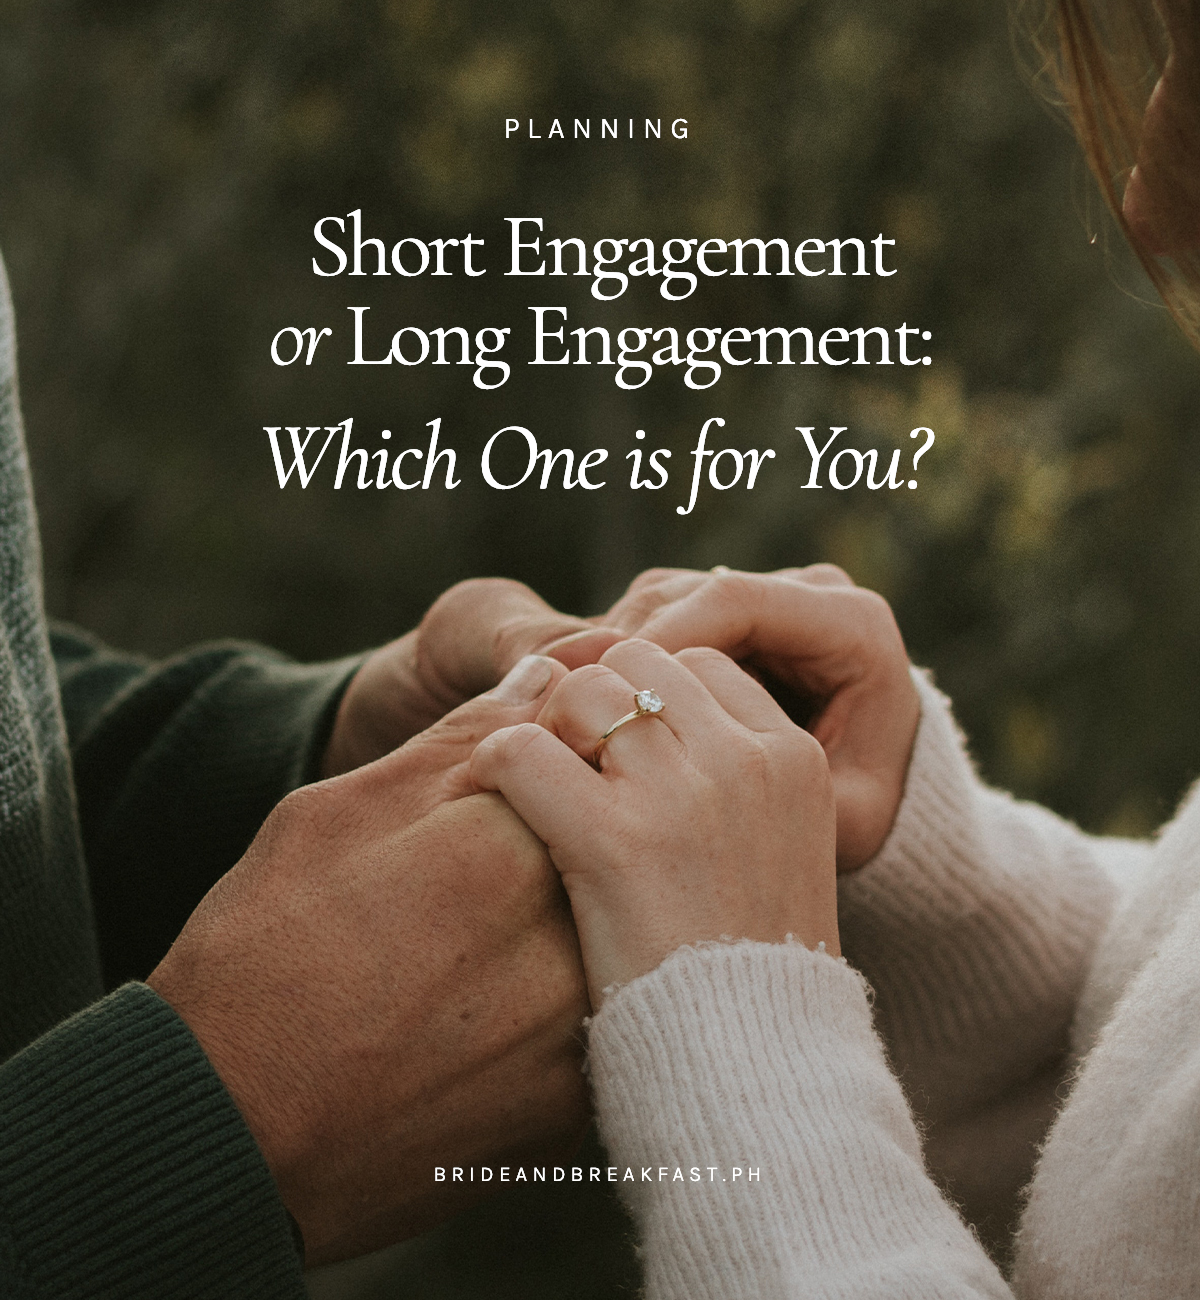 Short Engagement or Long Engagement: Which One is for You?